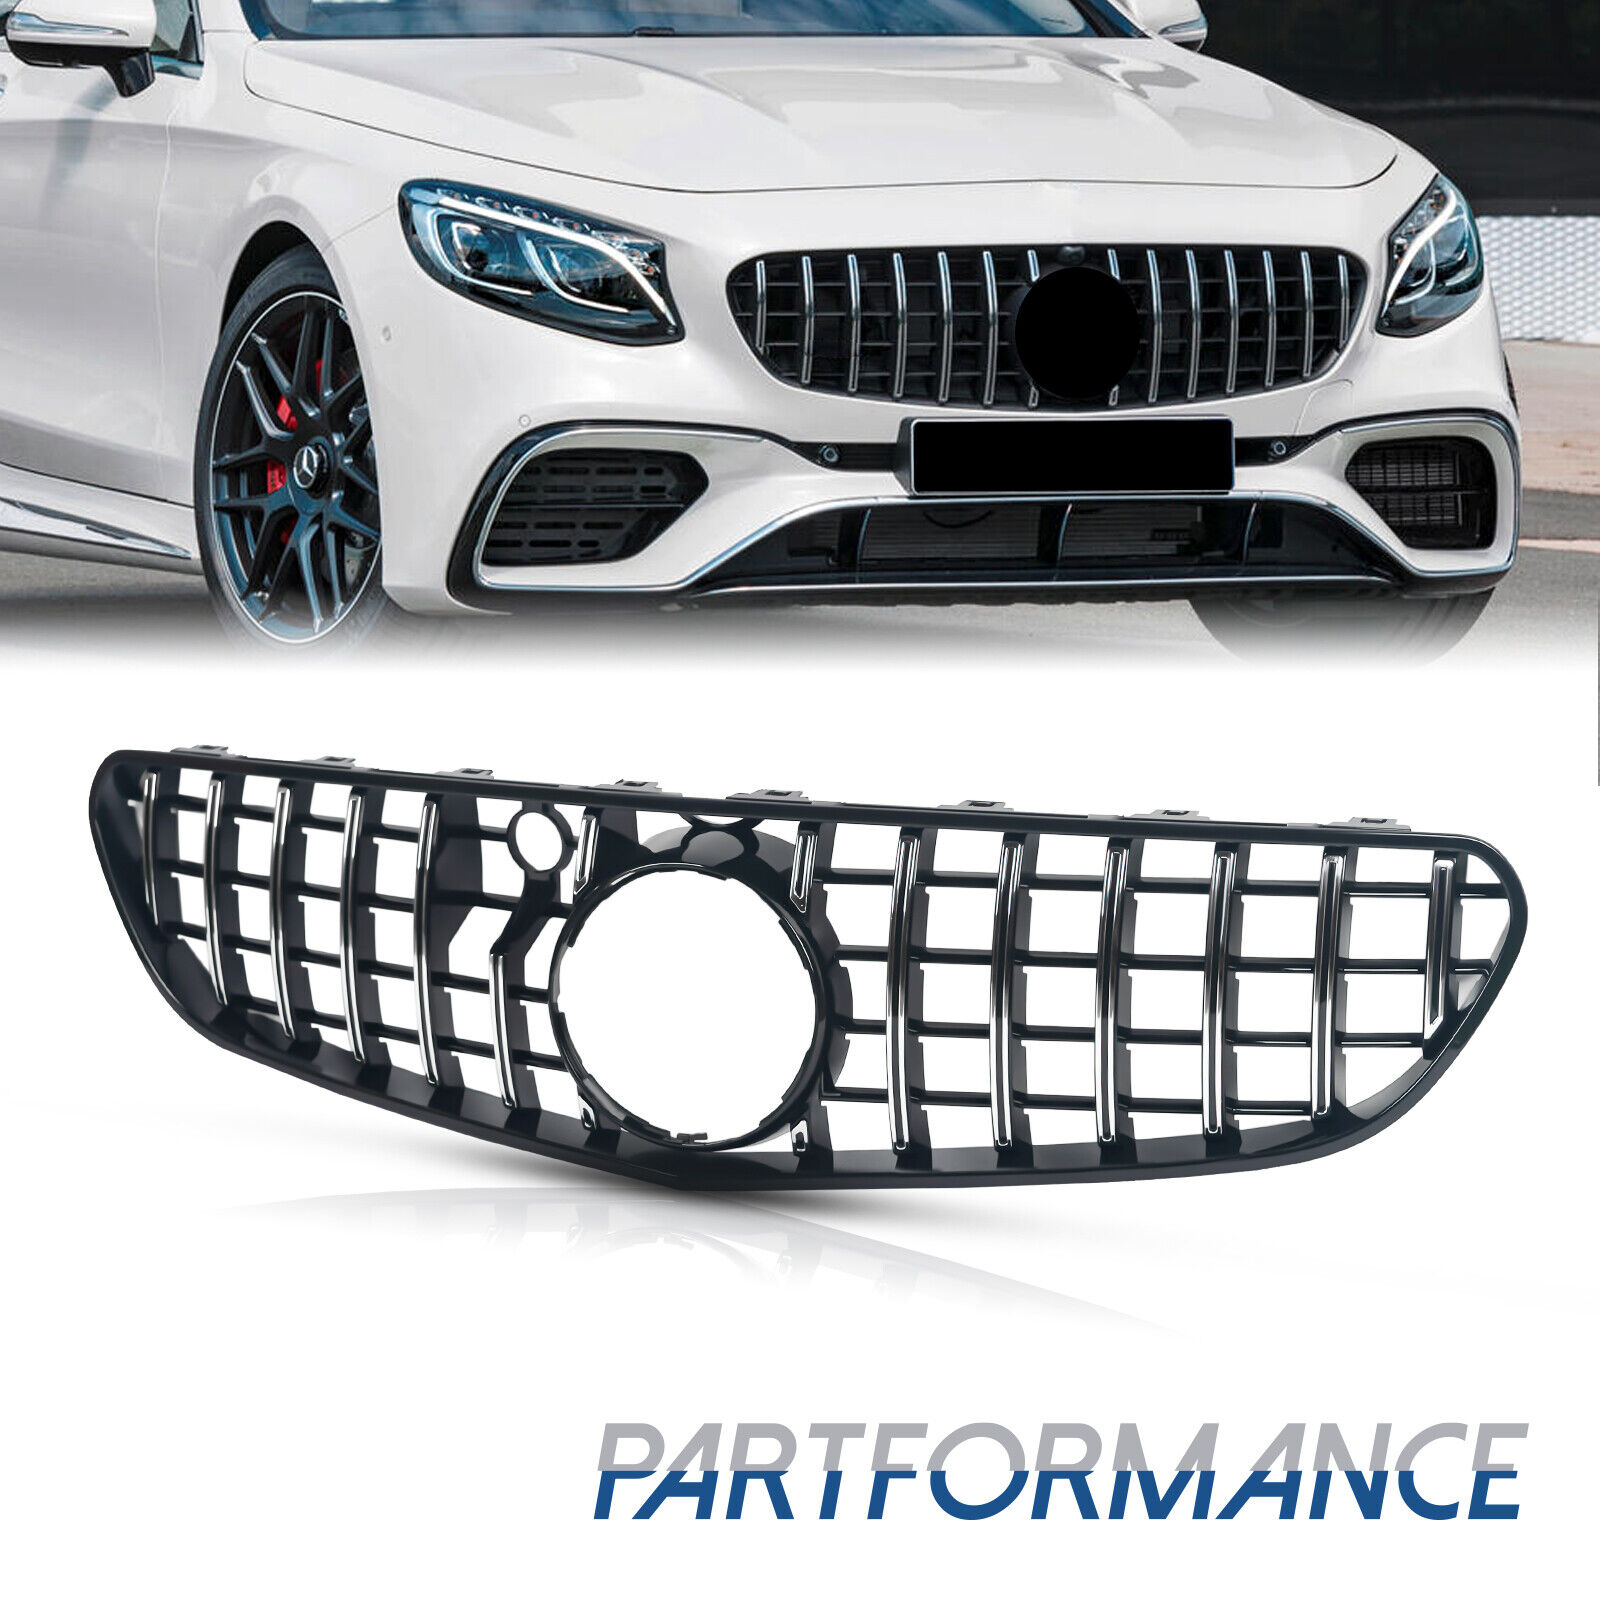 GT Front Grille For Mercedes Benz W217 S63(ONLY) AMG Pre-/Facelift 2014-2020